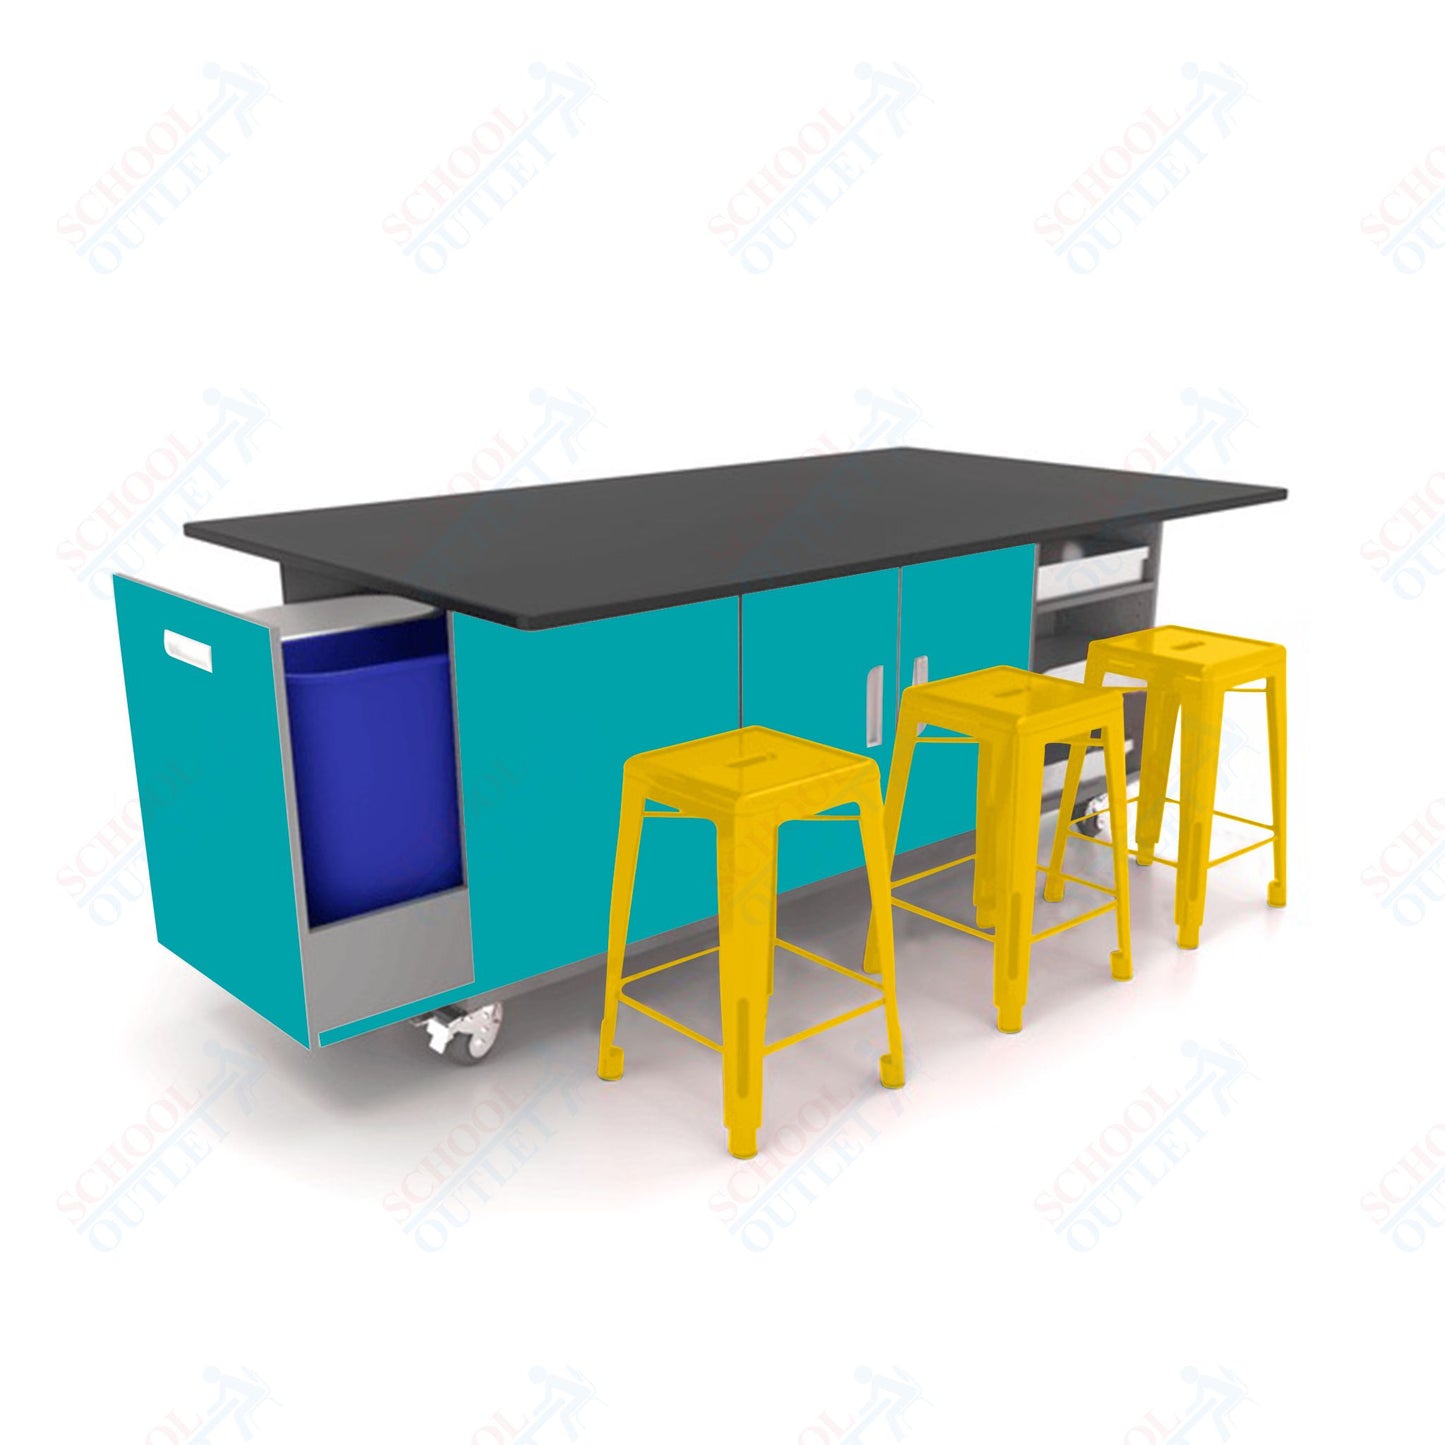 CEF ED Original Table 42"H Chemical Resistant Top, Laminate Base with  6 Stools, Storage Bins, Trash Bins, and Electrical Outlets Included.